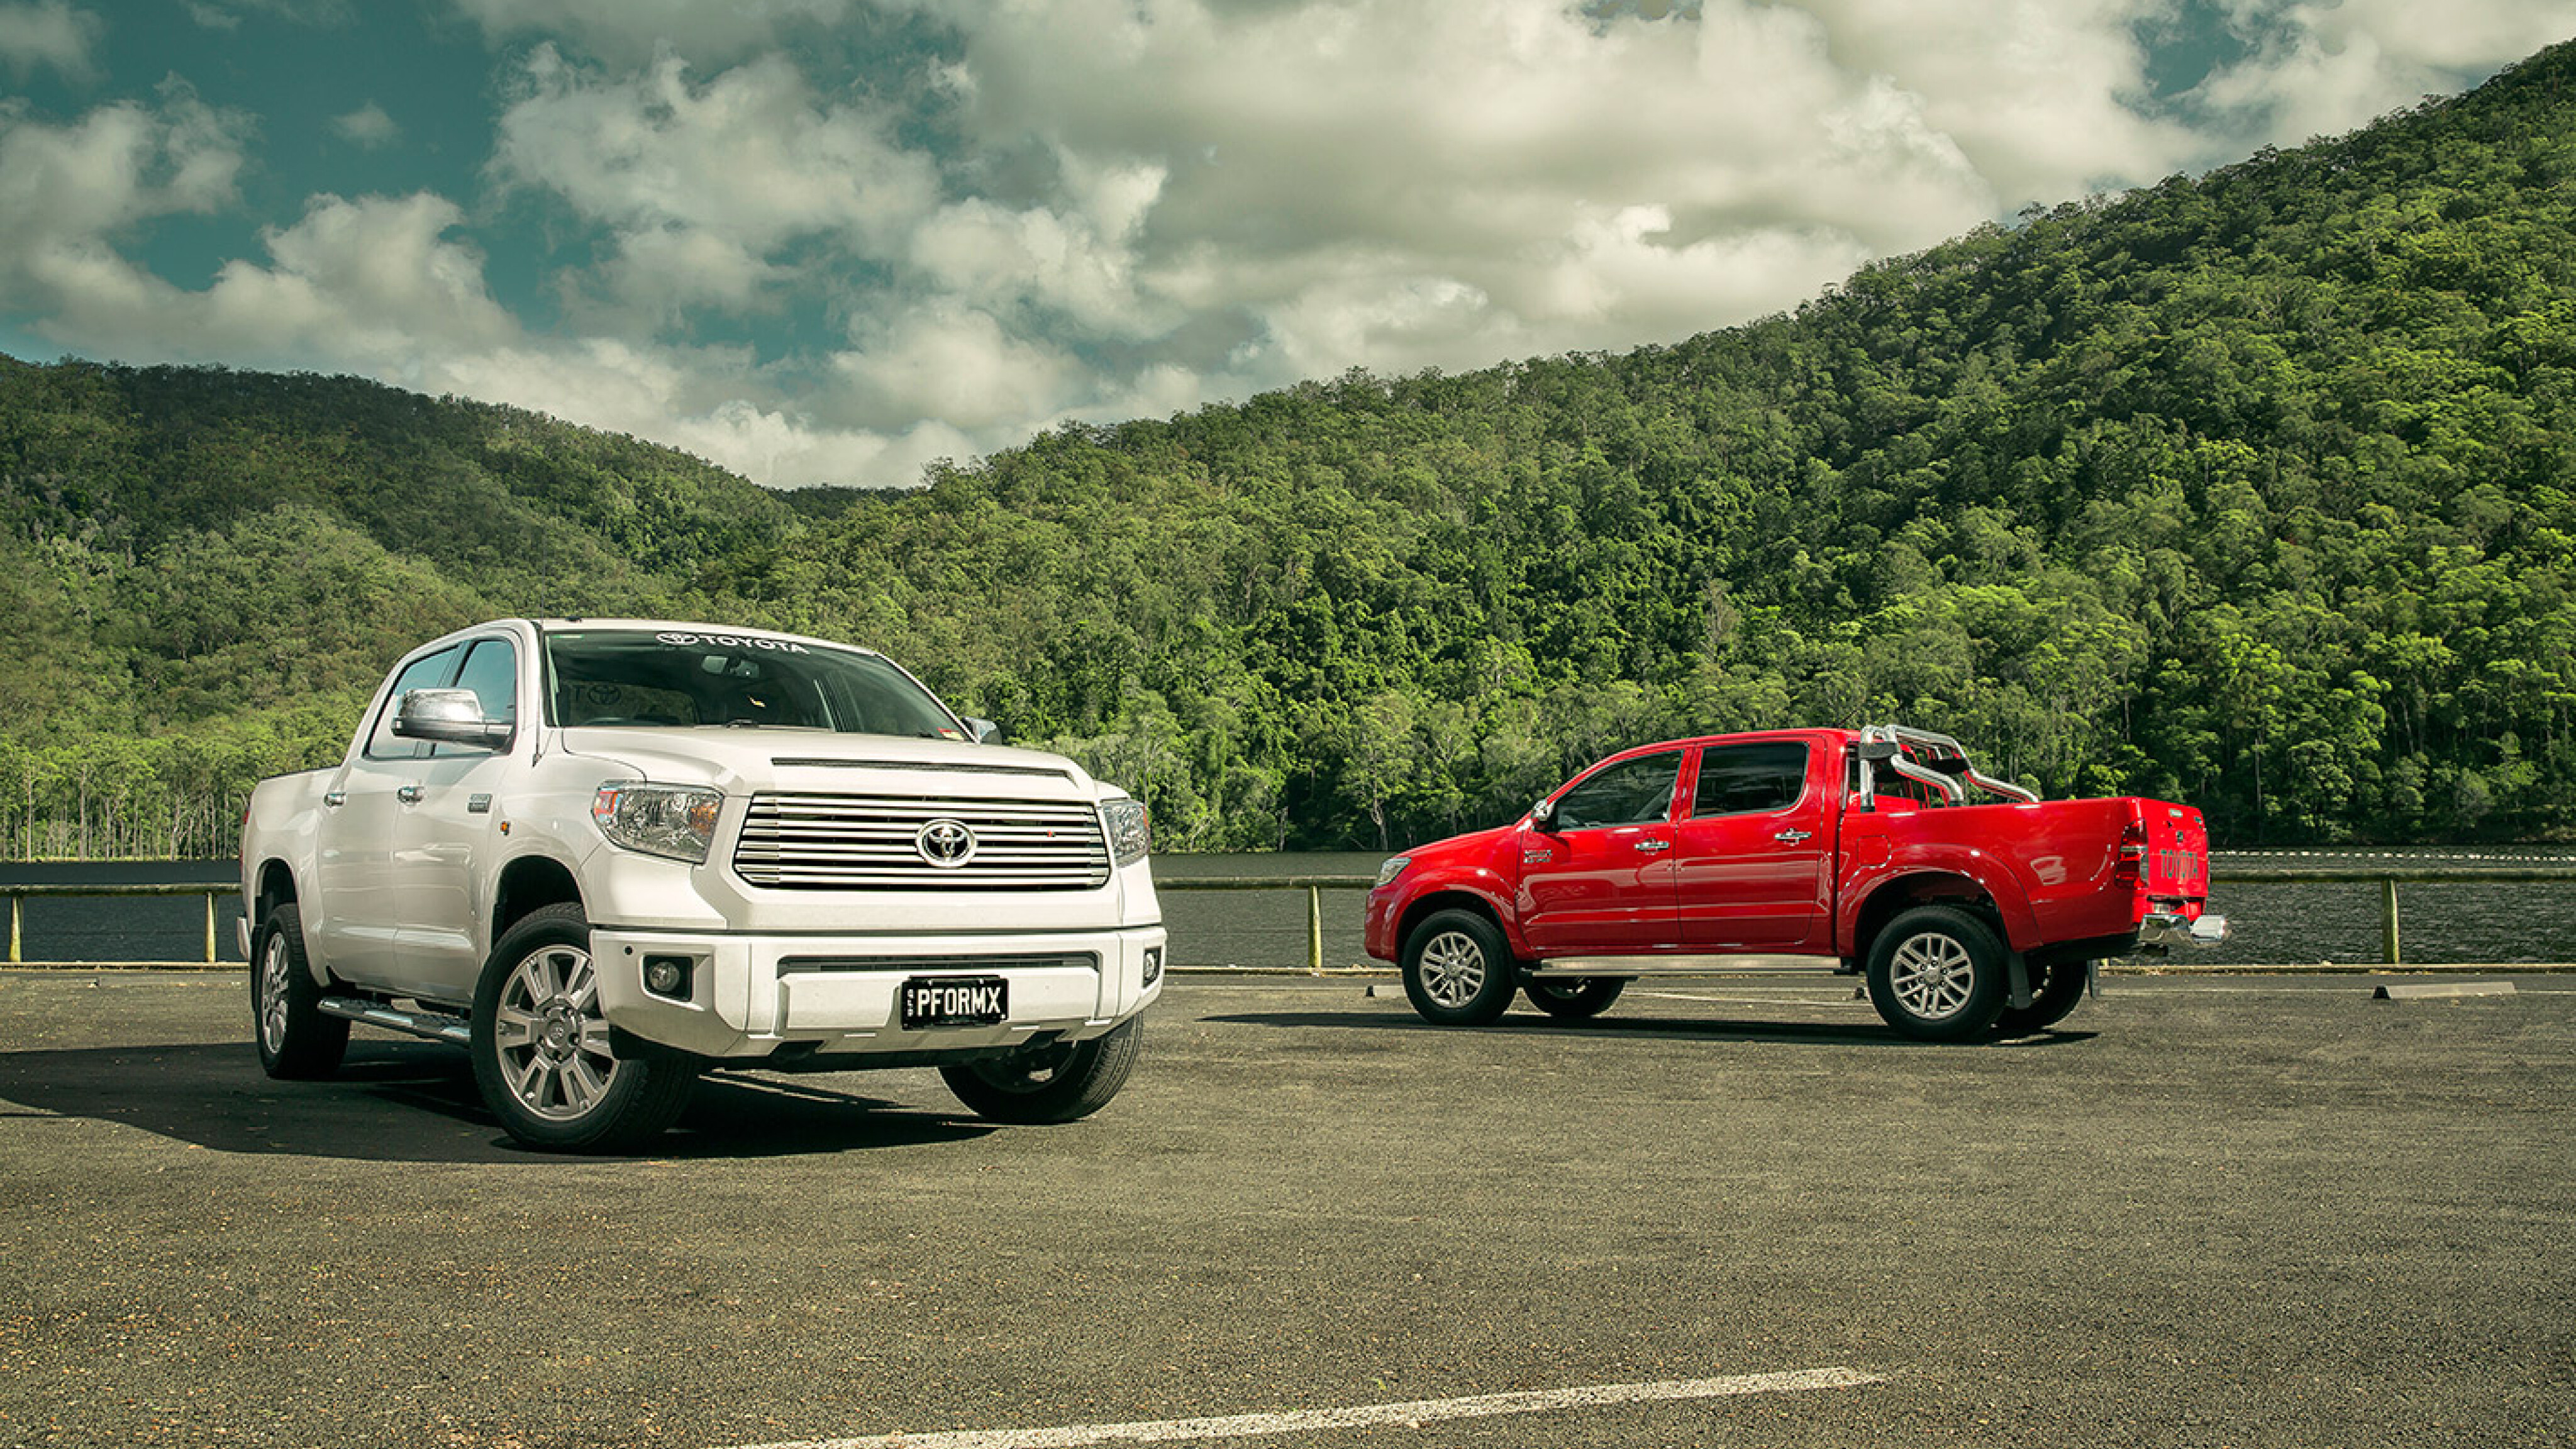 New Toyota Hilux Special Edition Is For Truck Buyers Who Want To Stand Out